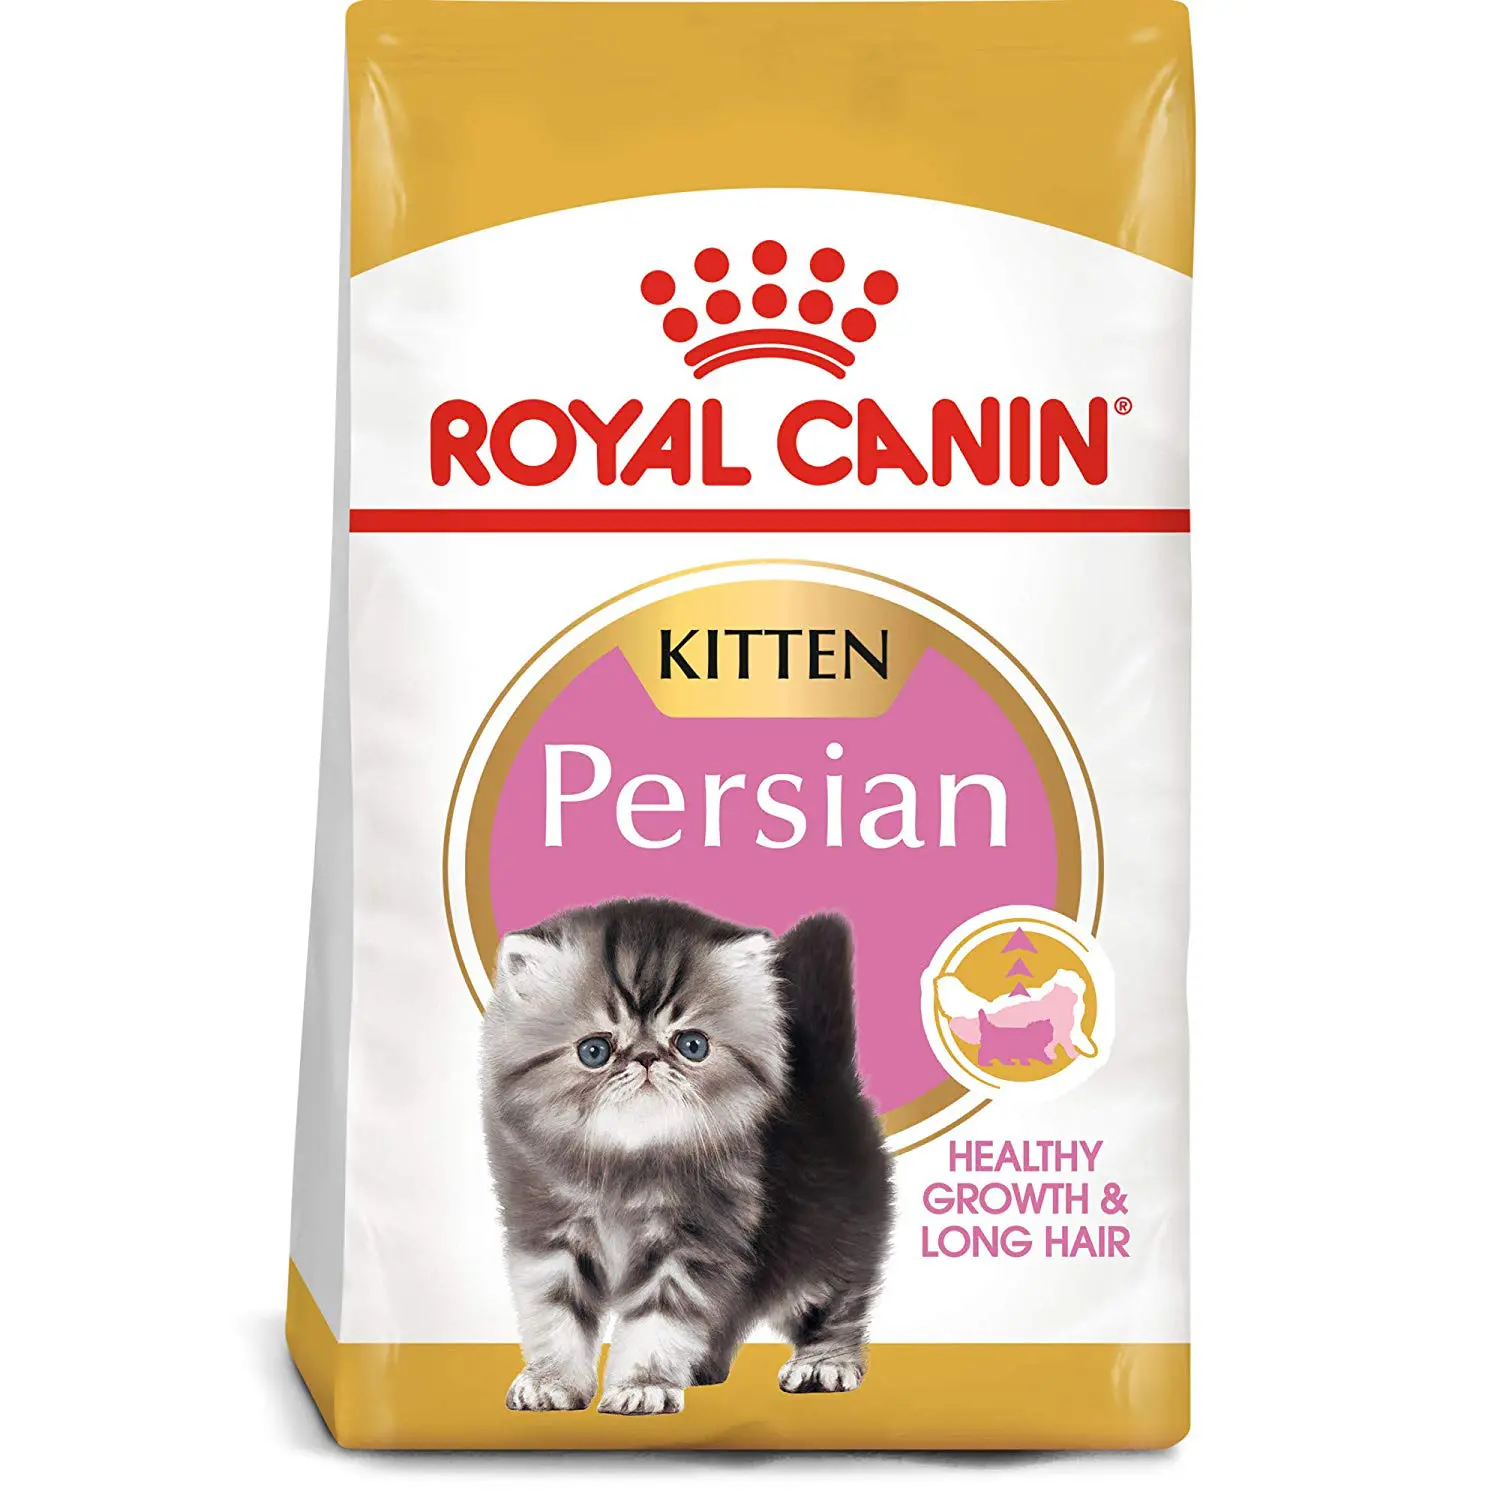 Specially Formulated for the Unique Needs of Royal Canin Persian Kitten